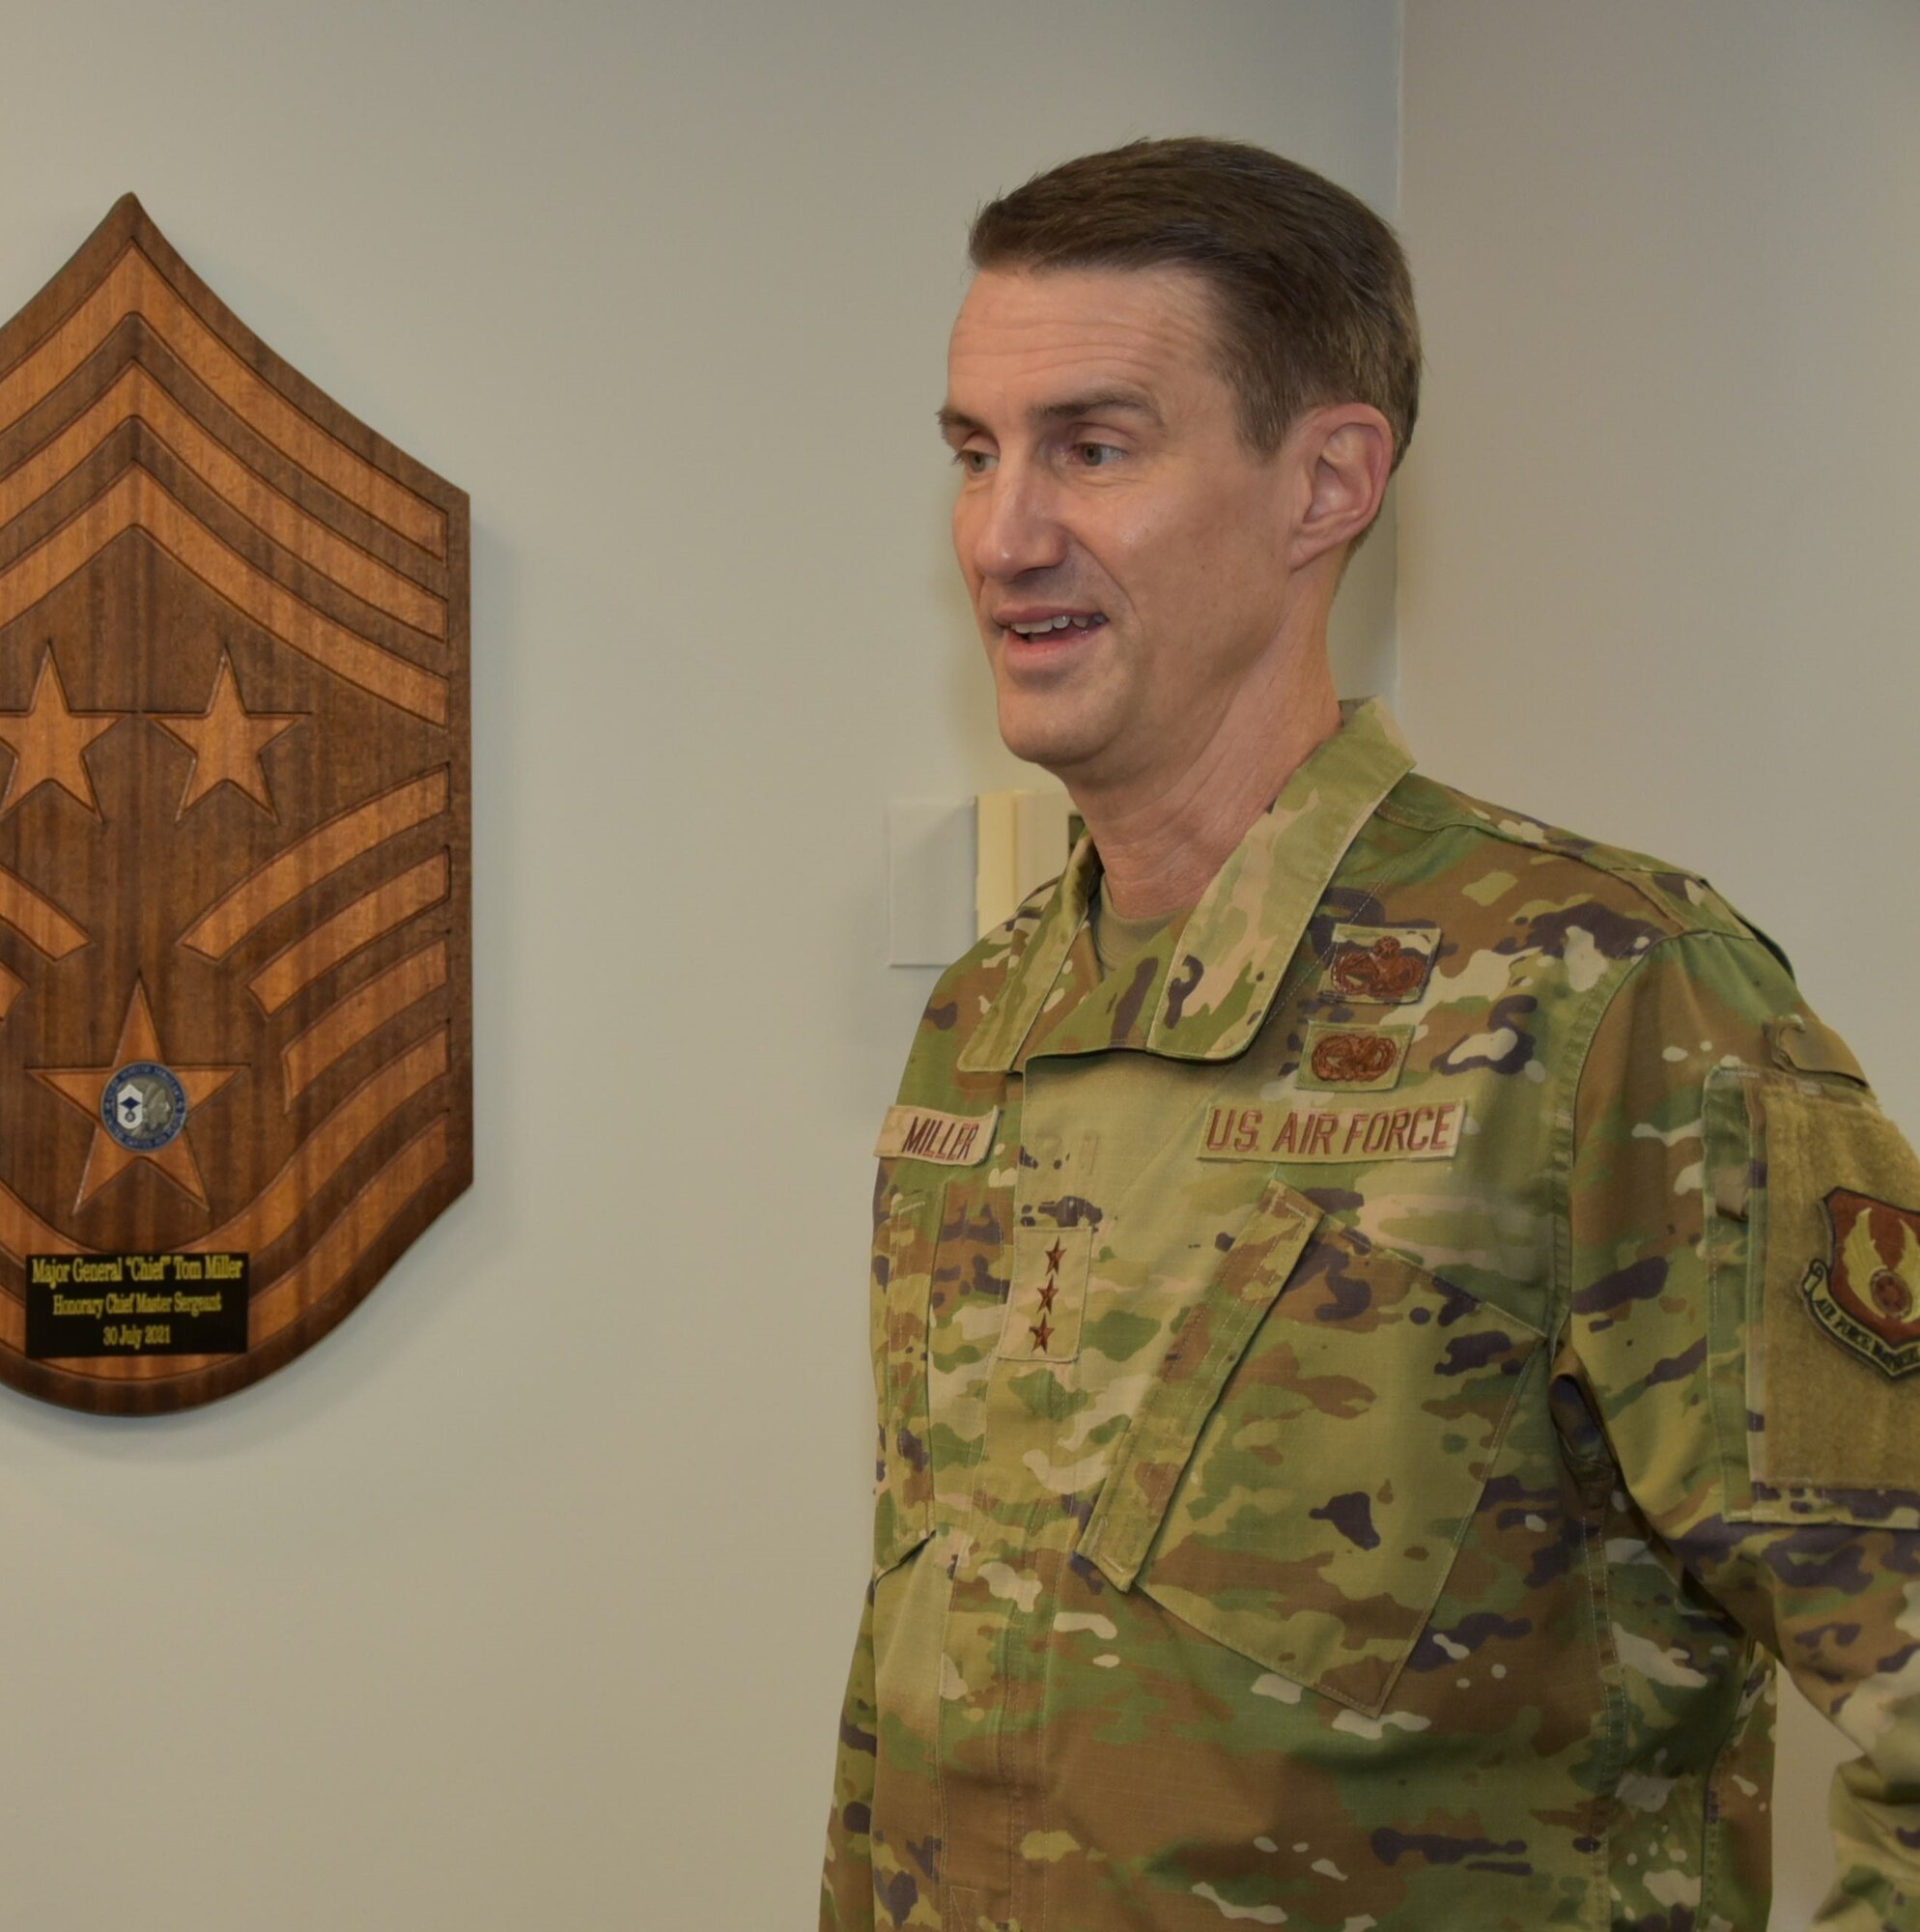 Lt. Gen. Tom Miller talks about his responsibility as commander of the AFSC and his plans for leading its nearly 40,000 Airmen who focus on mission readiness.